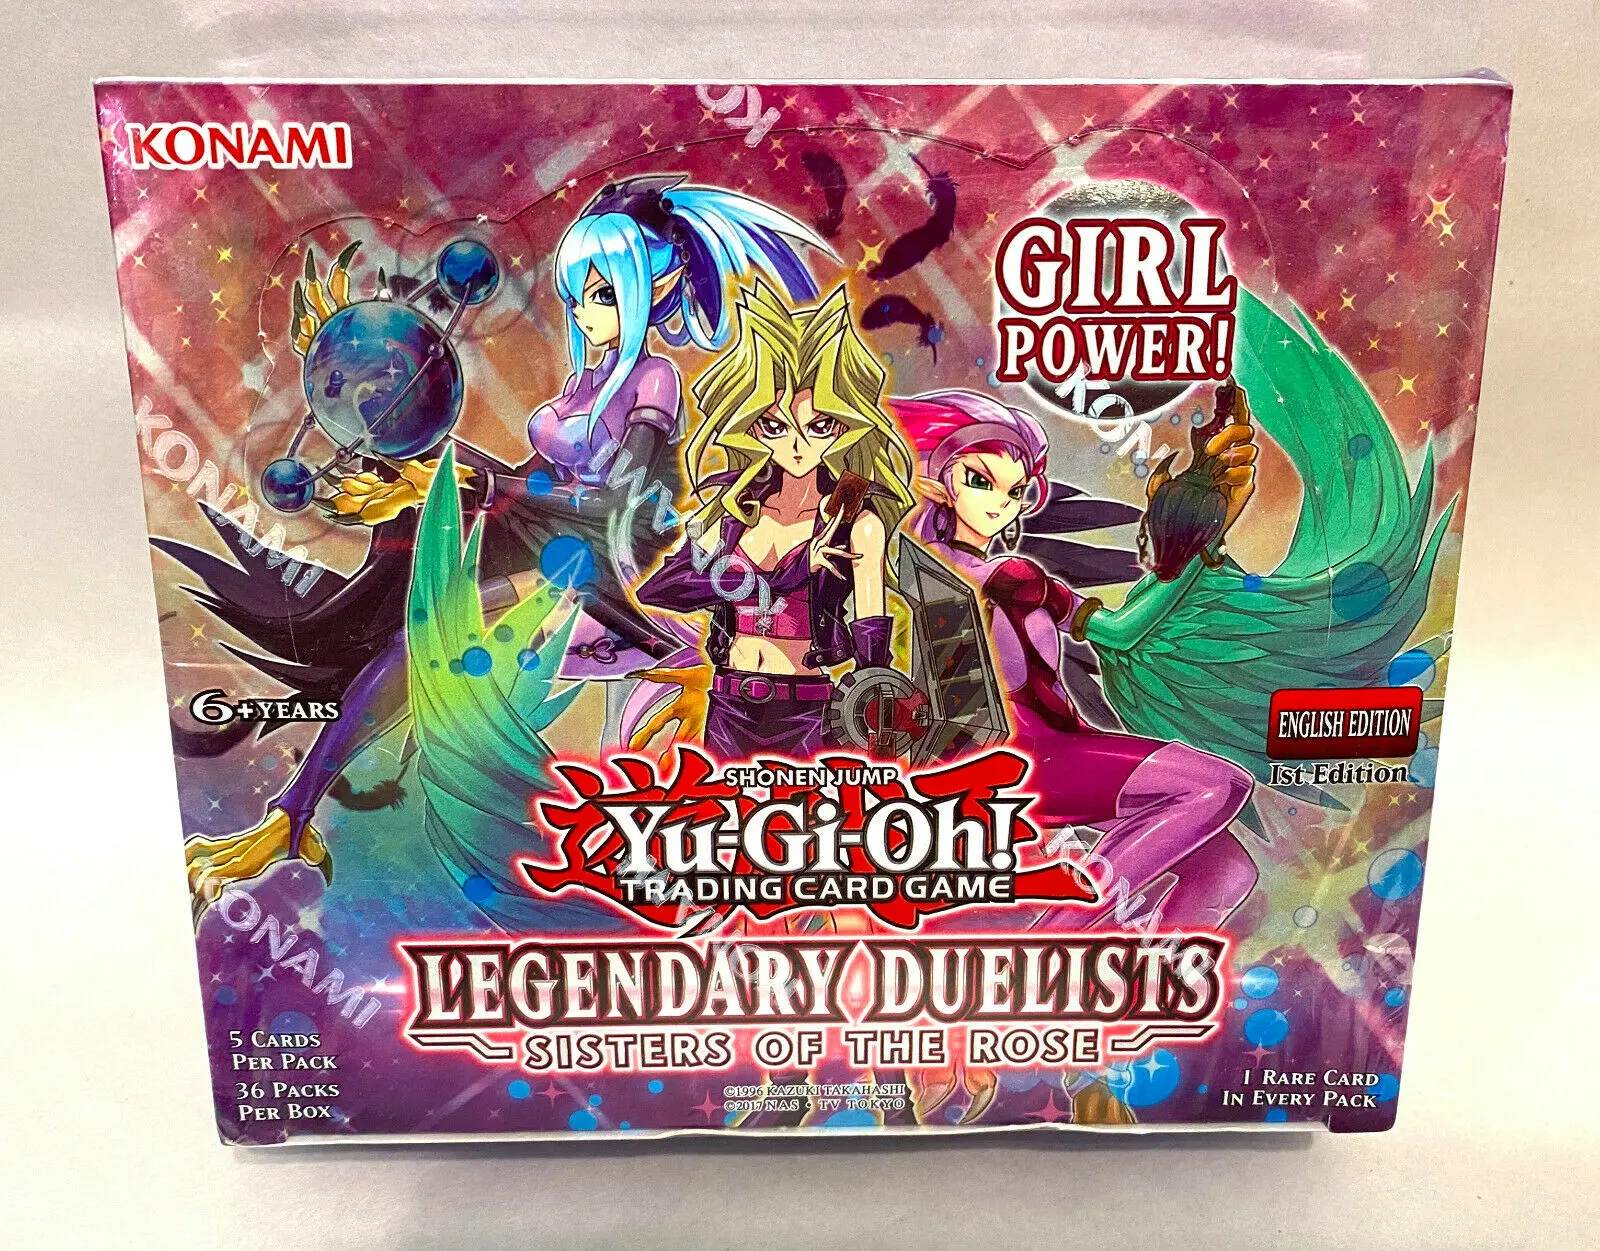 

YuGiOh Yu-Gi-Oh Konami Legendary Duelists Sisters of the Rose BOOSTER BOX 1st Edition English Sealed, Colorful